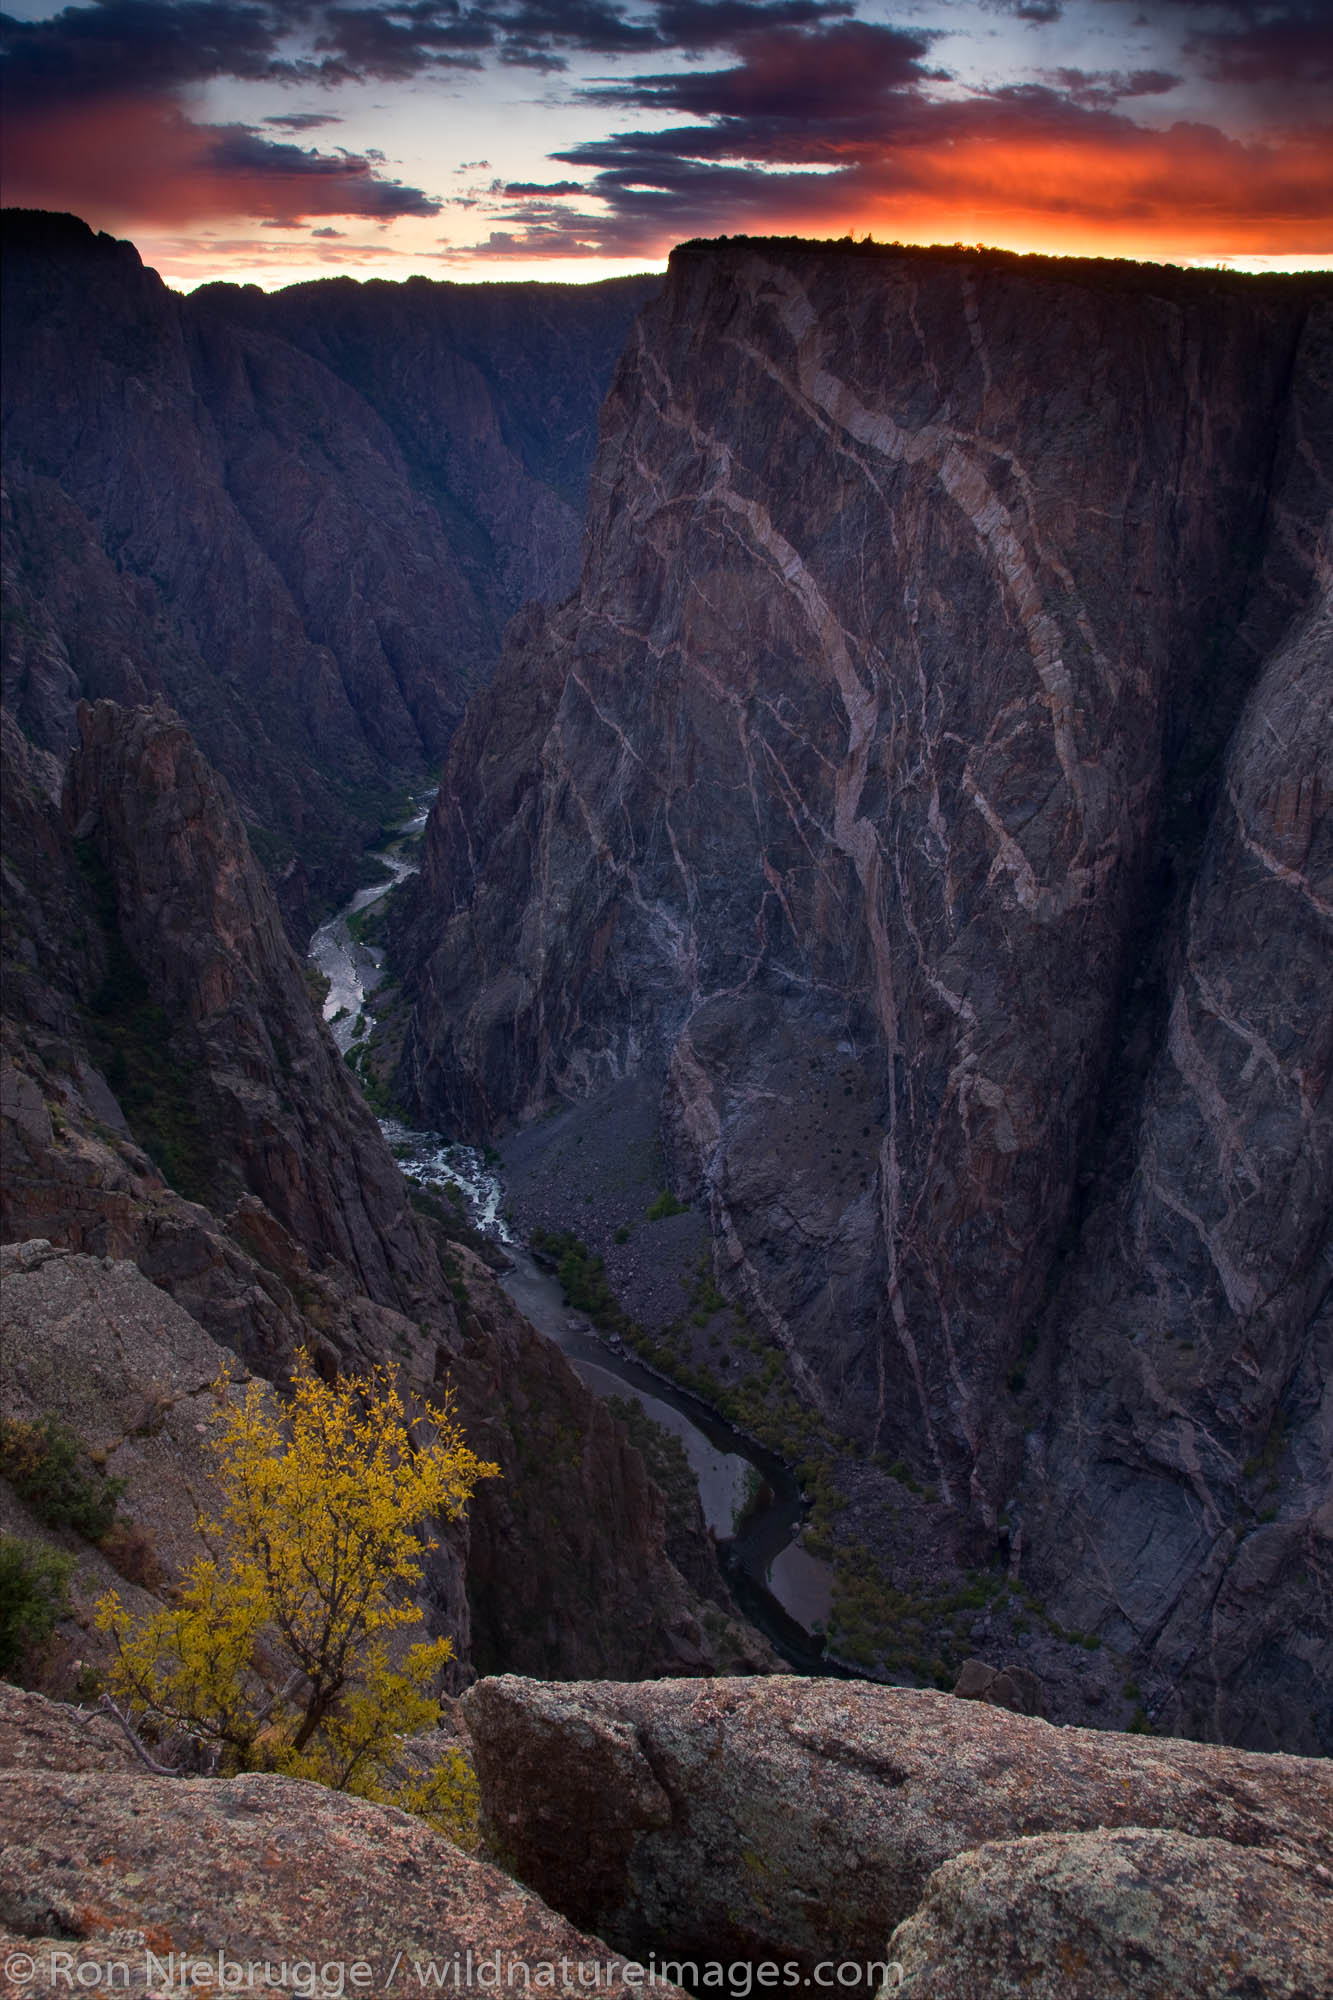 Painted Wall, Black Canyon of the Gunnison National Park, Colorado.